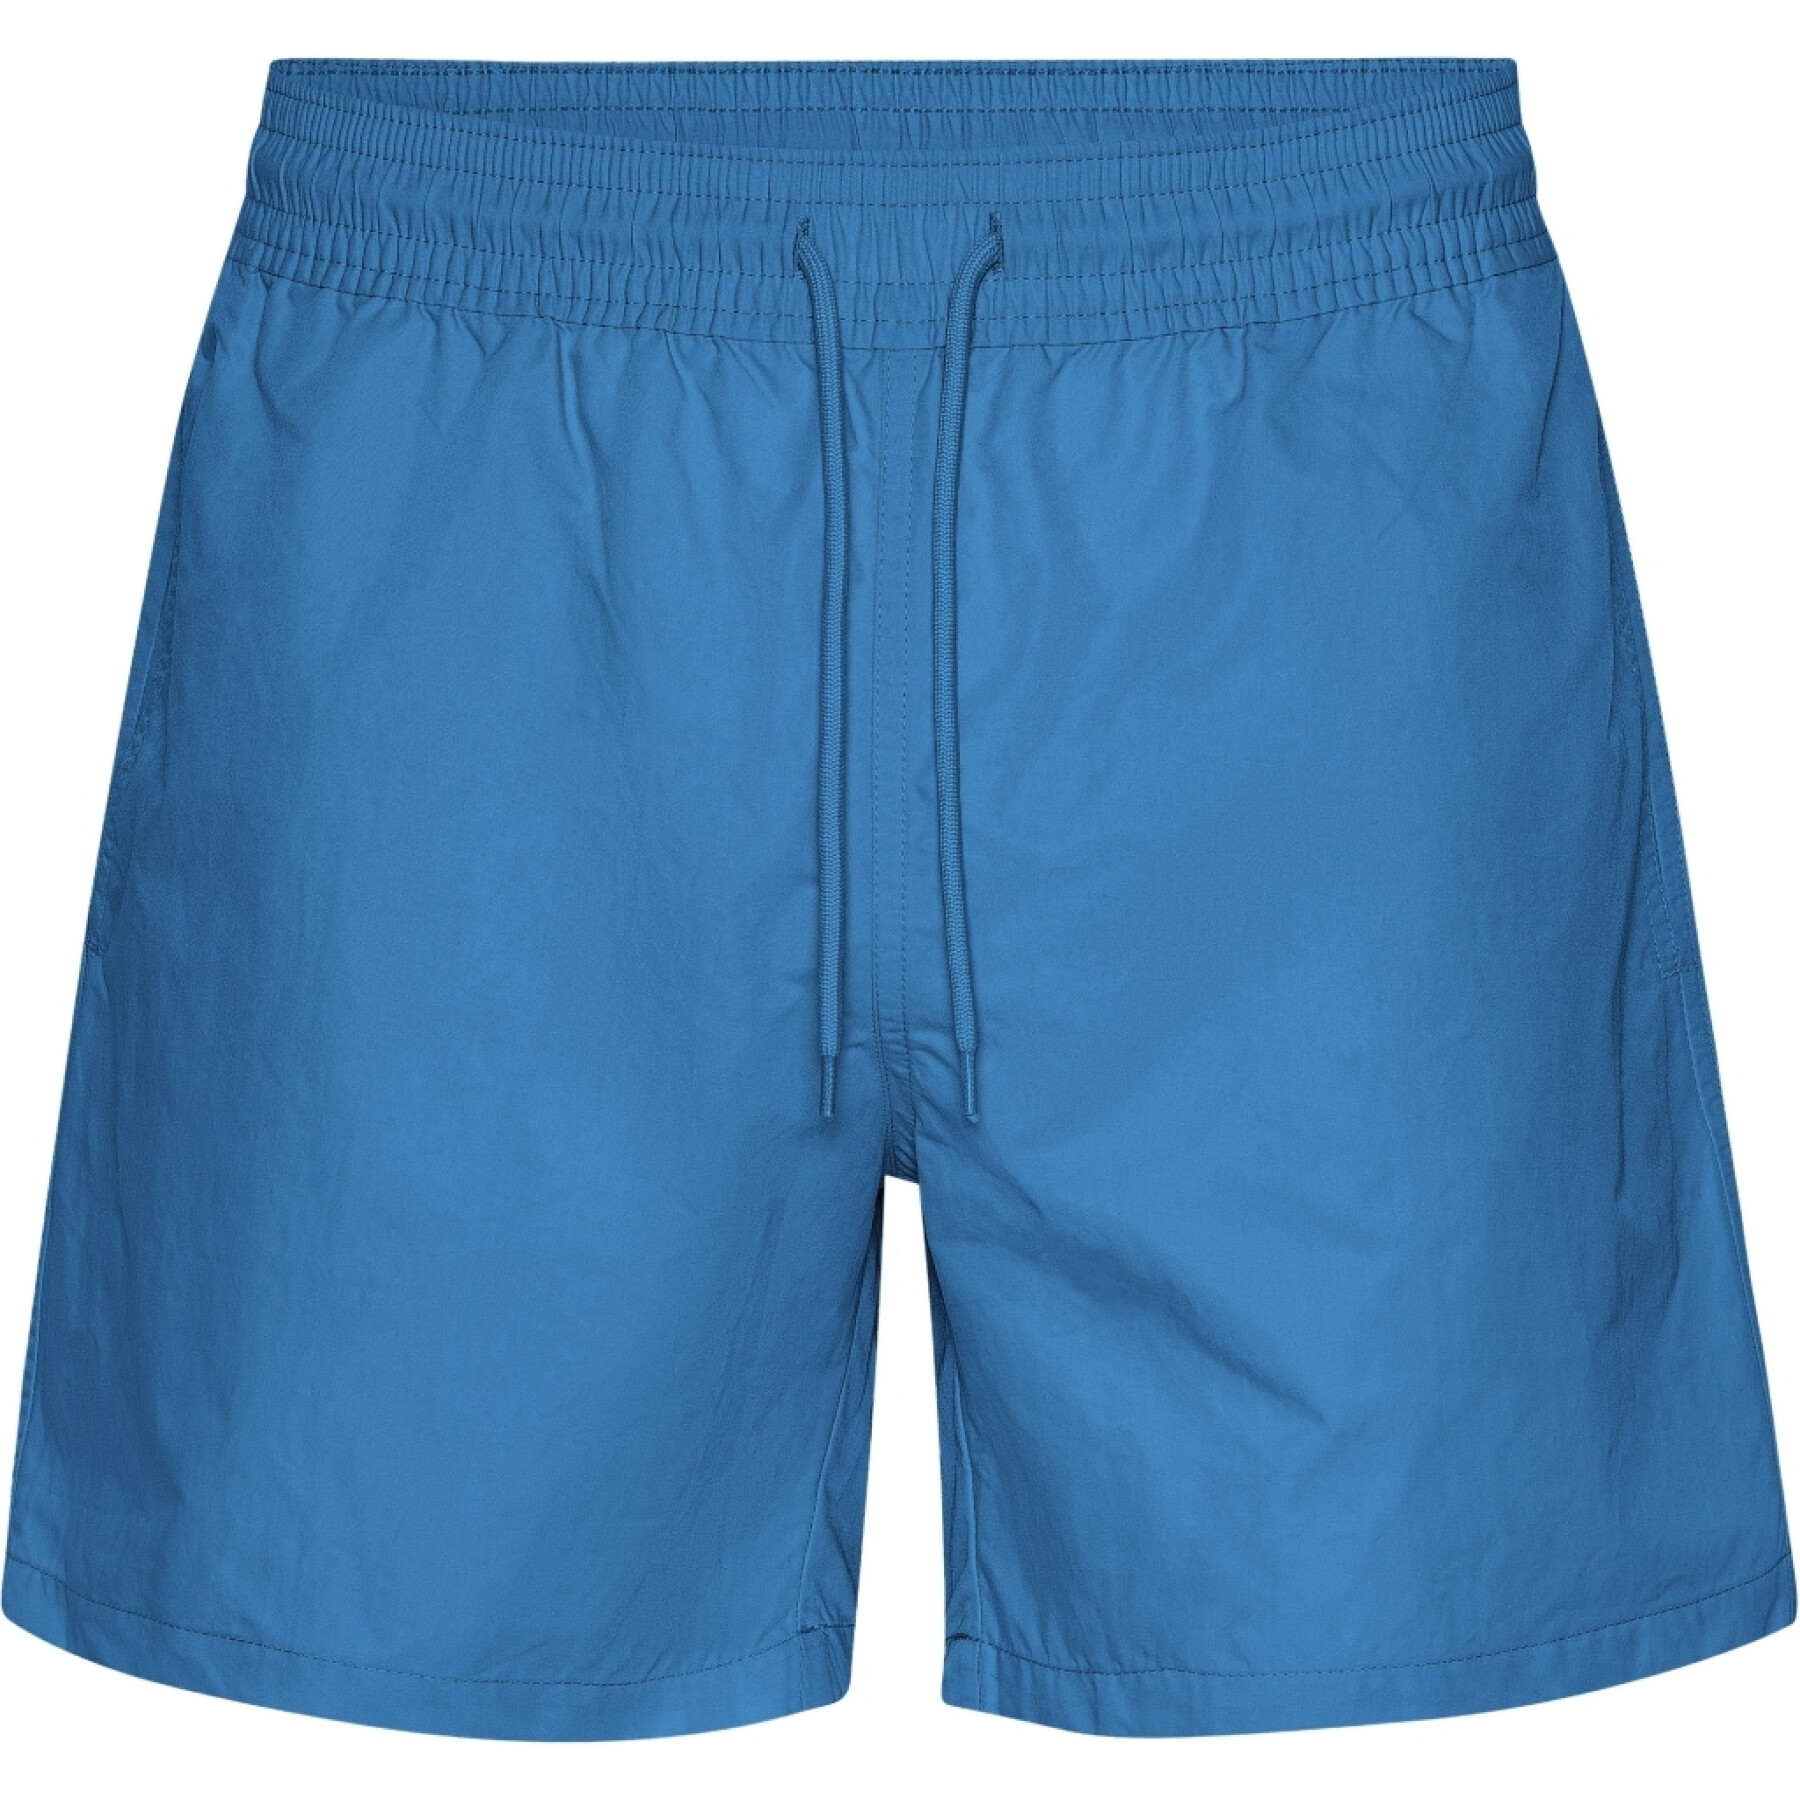 Badehose Colorful Standard Classic Pacific Blue